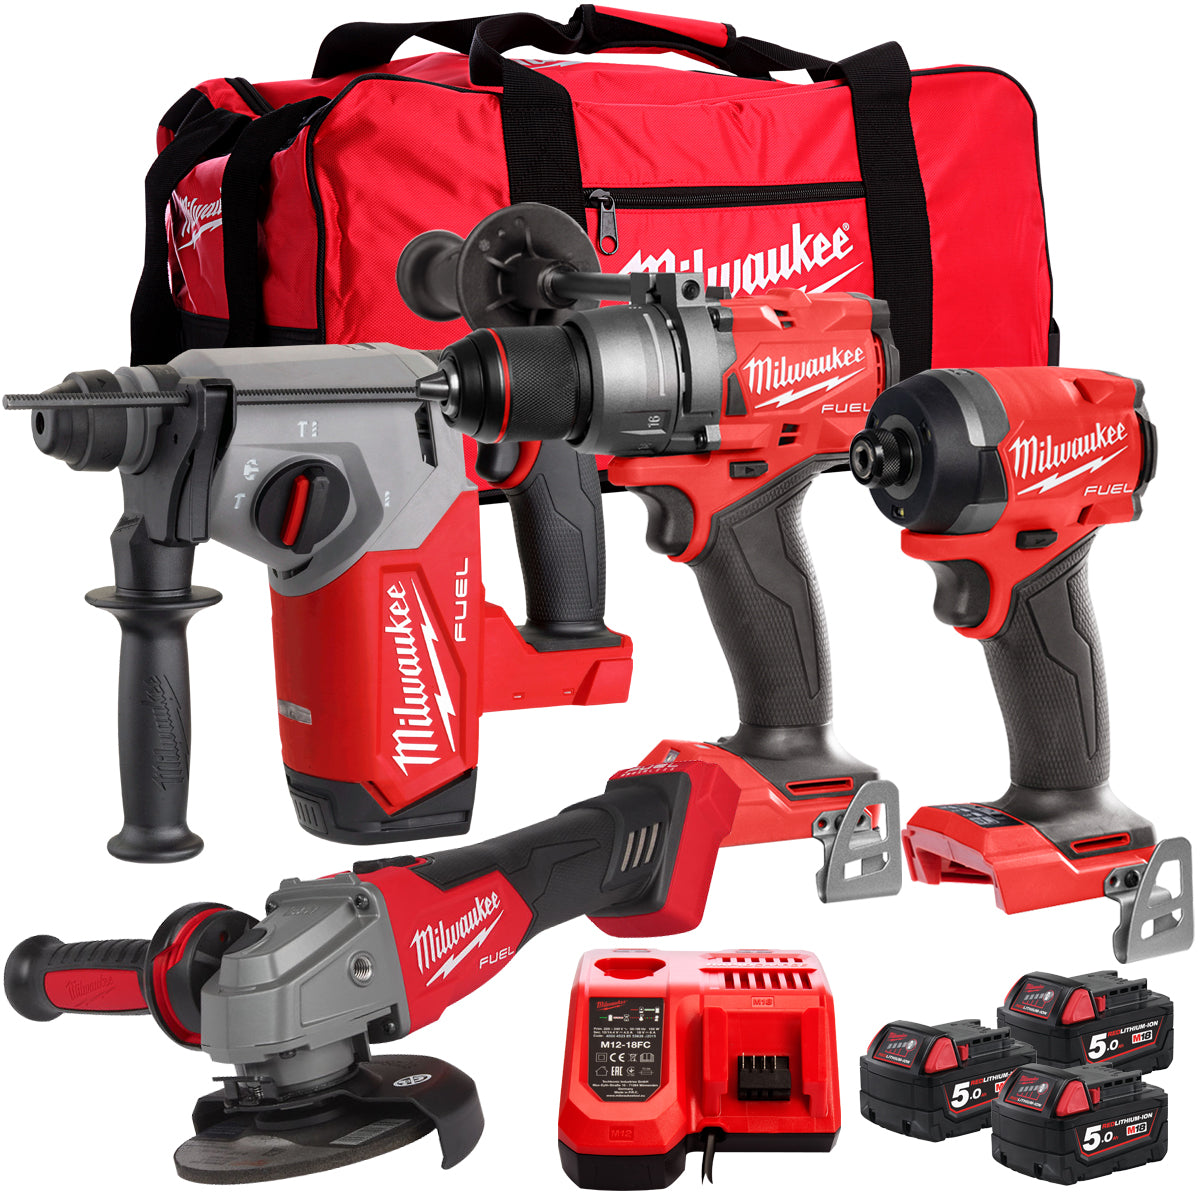 The Best Milwaukee Power Tool Combo Kits And Why People Love Them